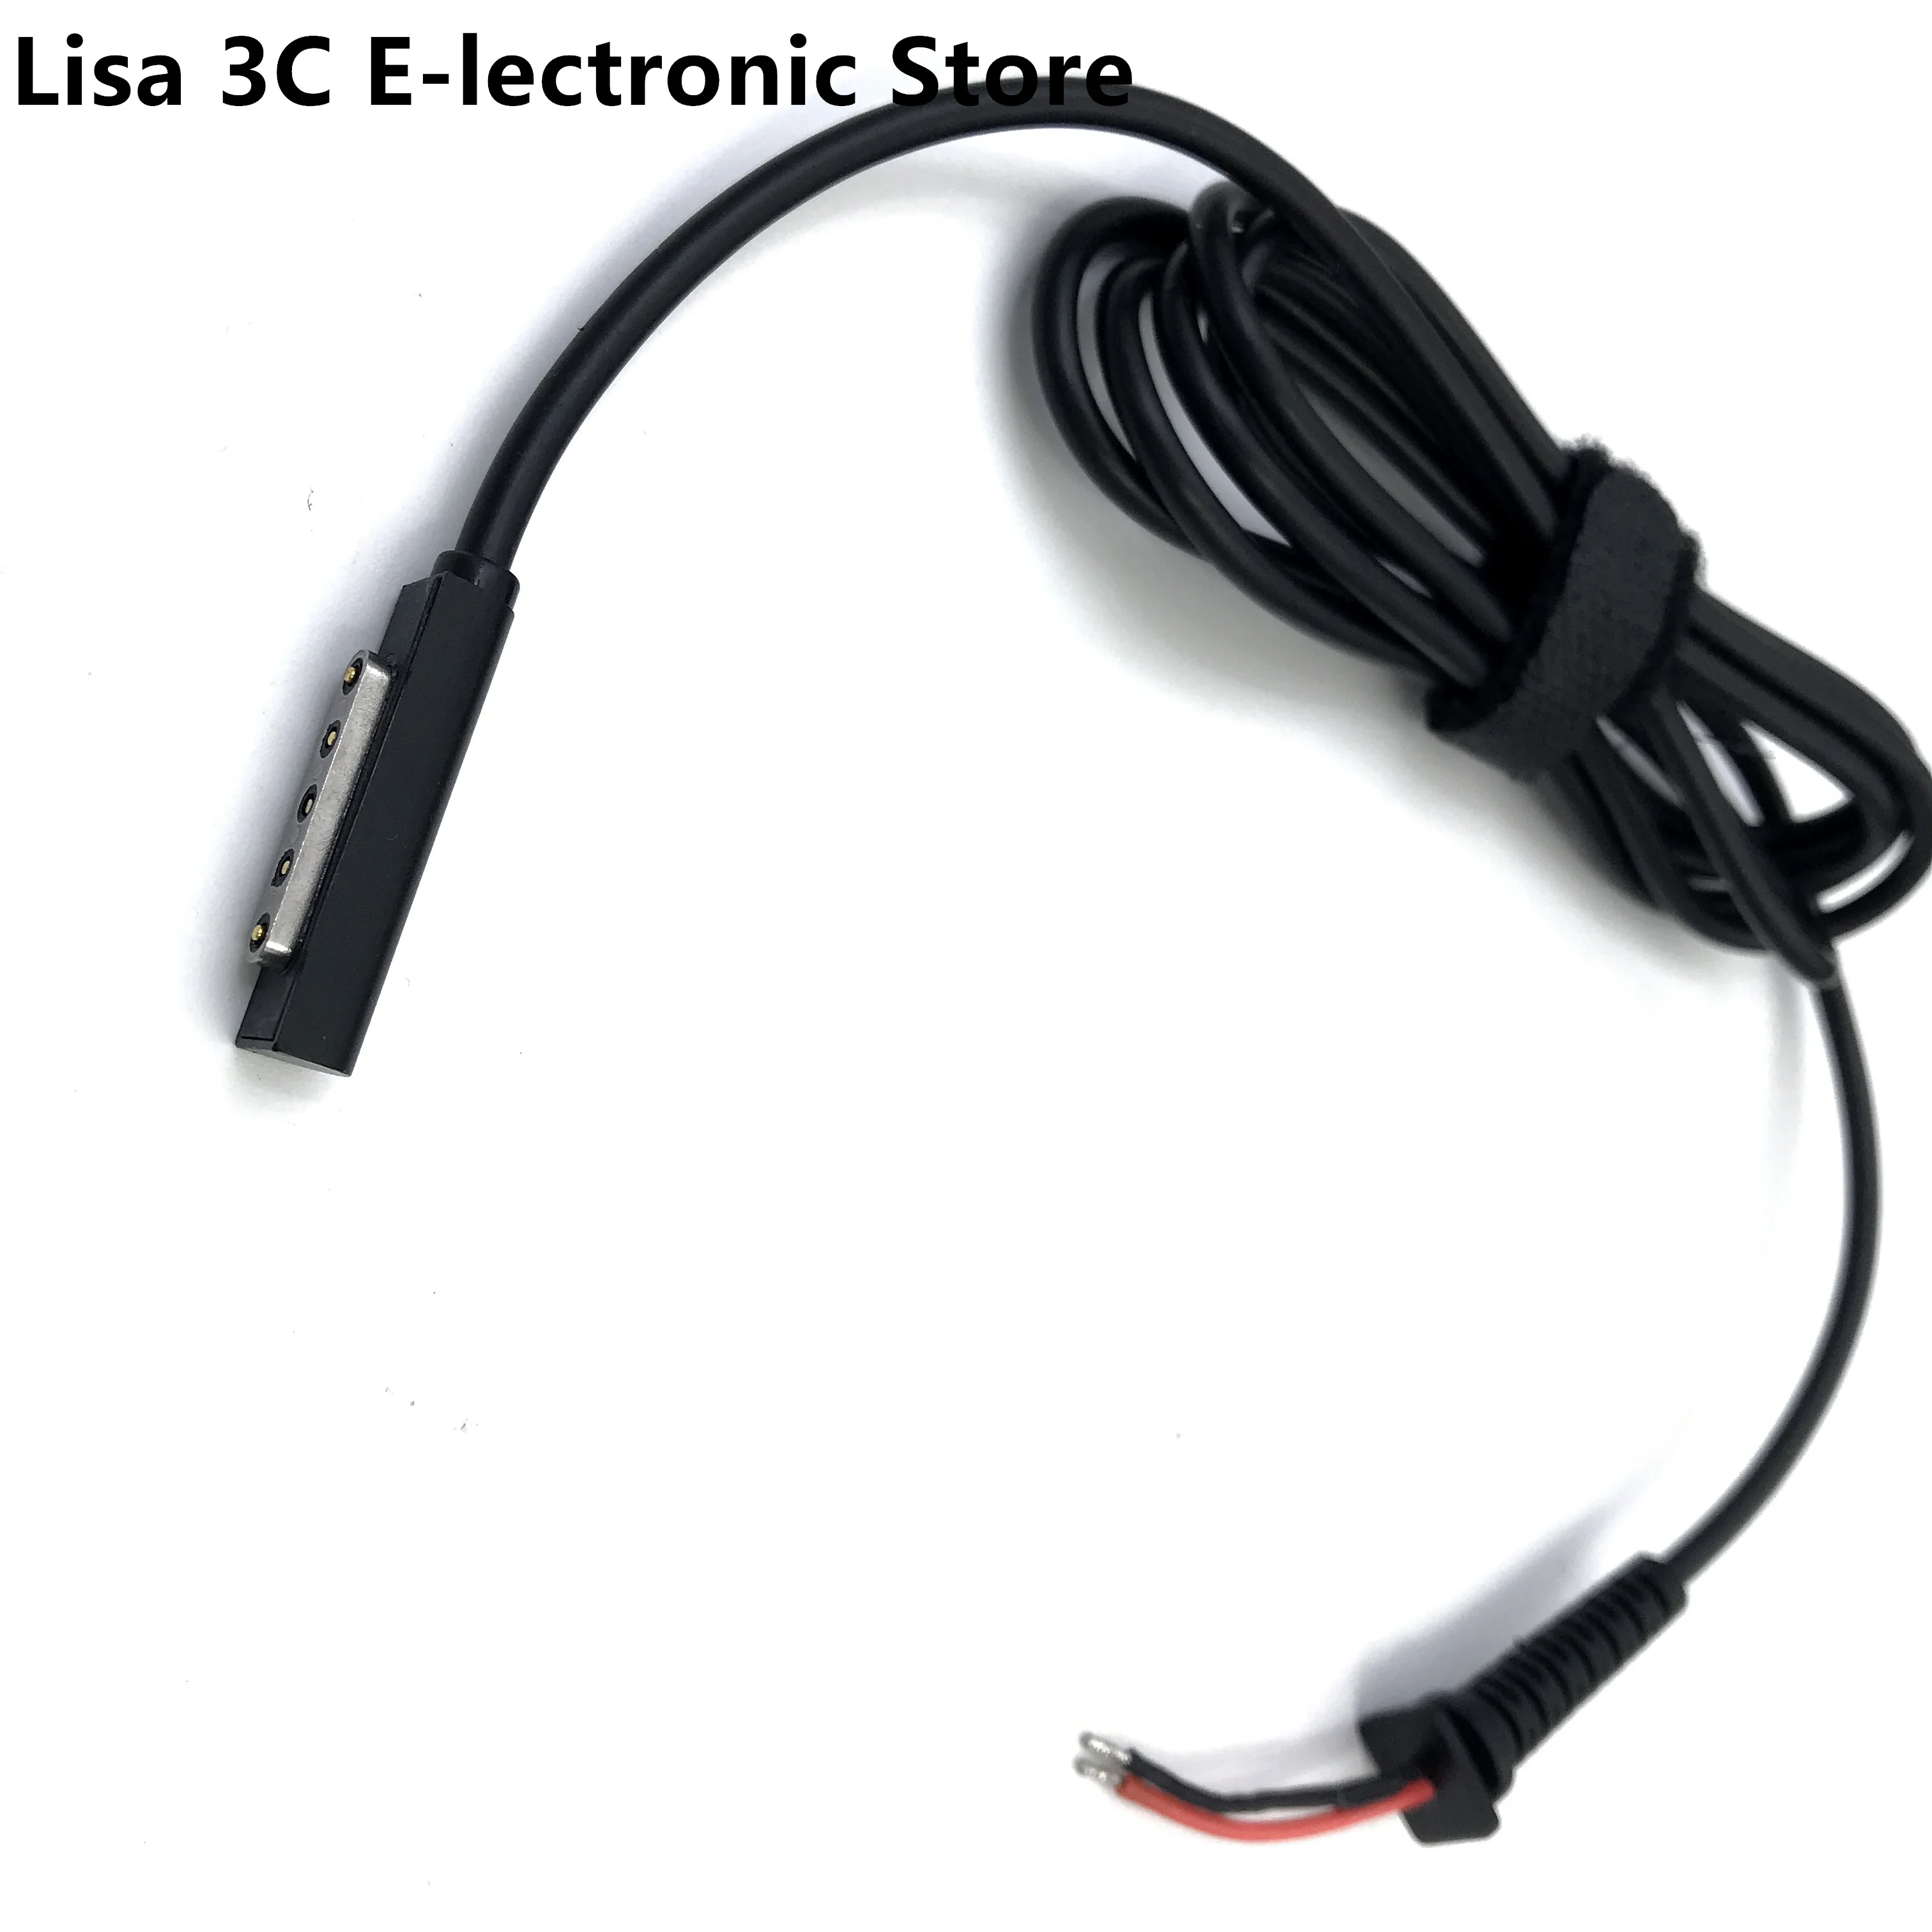 

External DC Power Supply Adapter Jack Charger Charging Connector Cable Cord for Microsoft Surface Pro 2 12V 3.6A